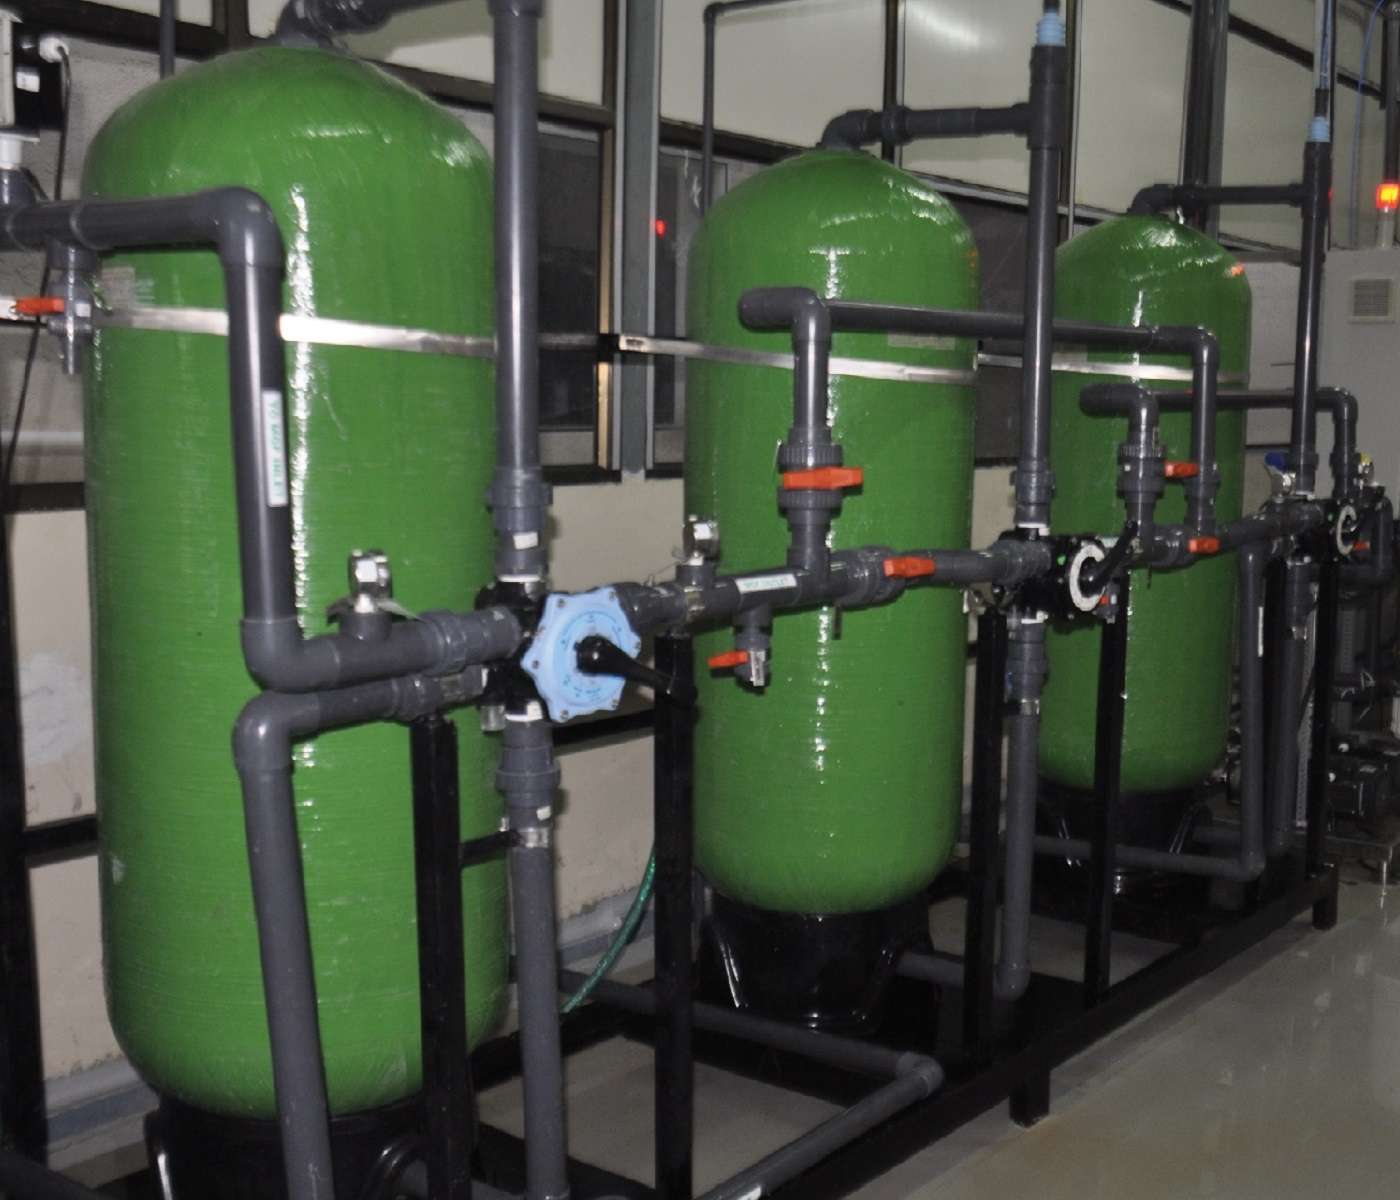 Potable water generation systems